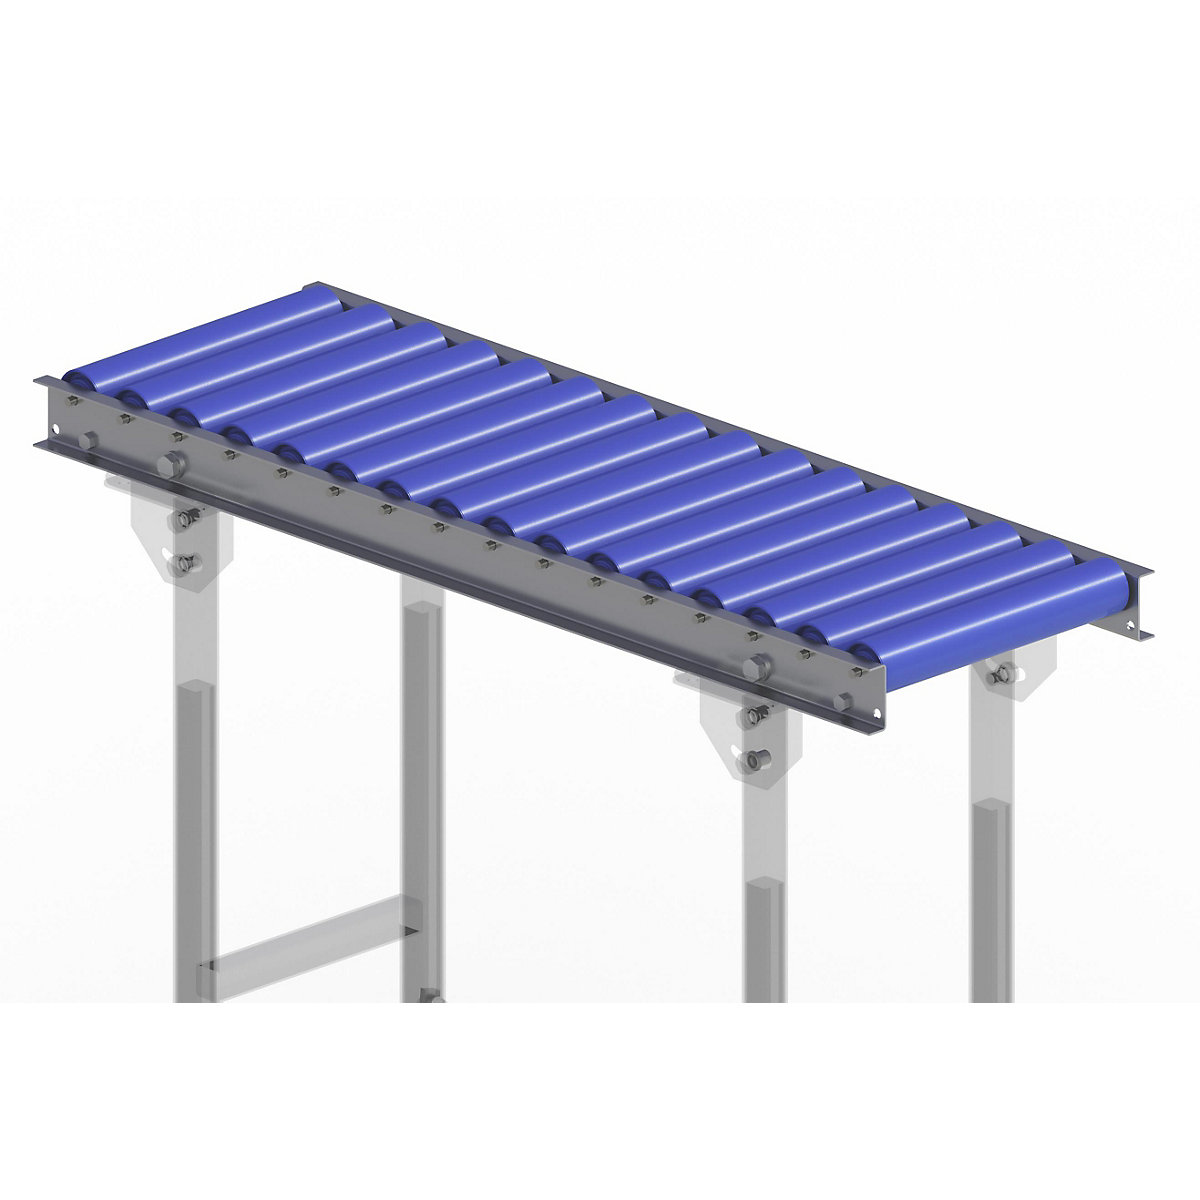 Gura – Light duty roller conveyor, steel frame with plastic rollers, track width 300 mm, axle spacing 62.5 mm, length 1 m